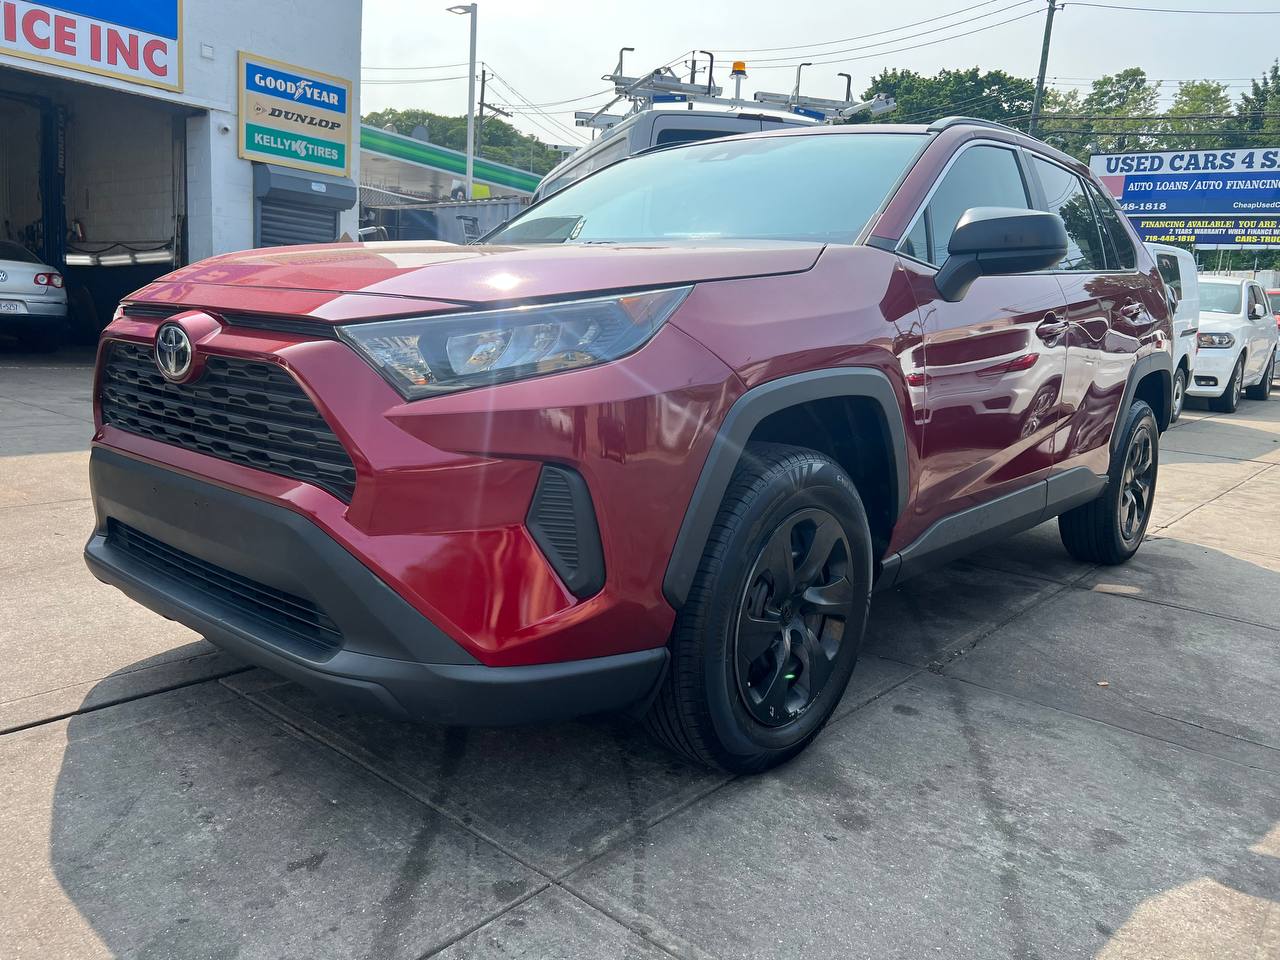 Used Car - 2019 Toyota RAV4 LE AWD for Sale in Staten Island, NY